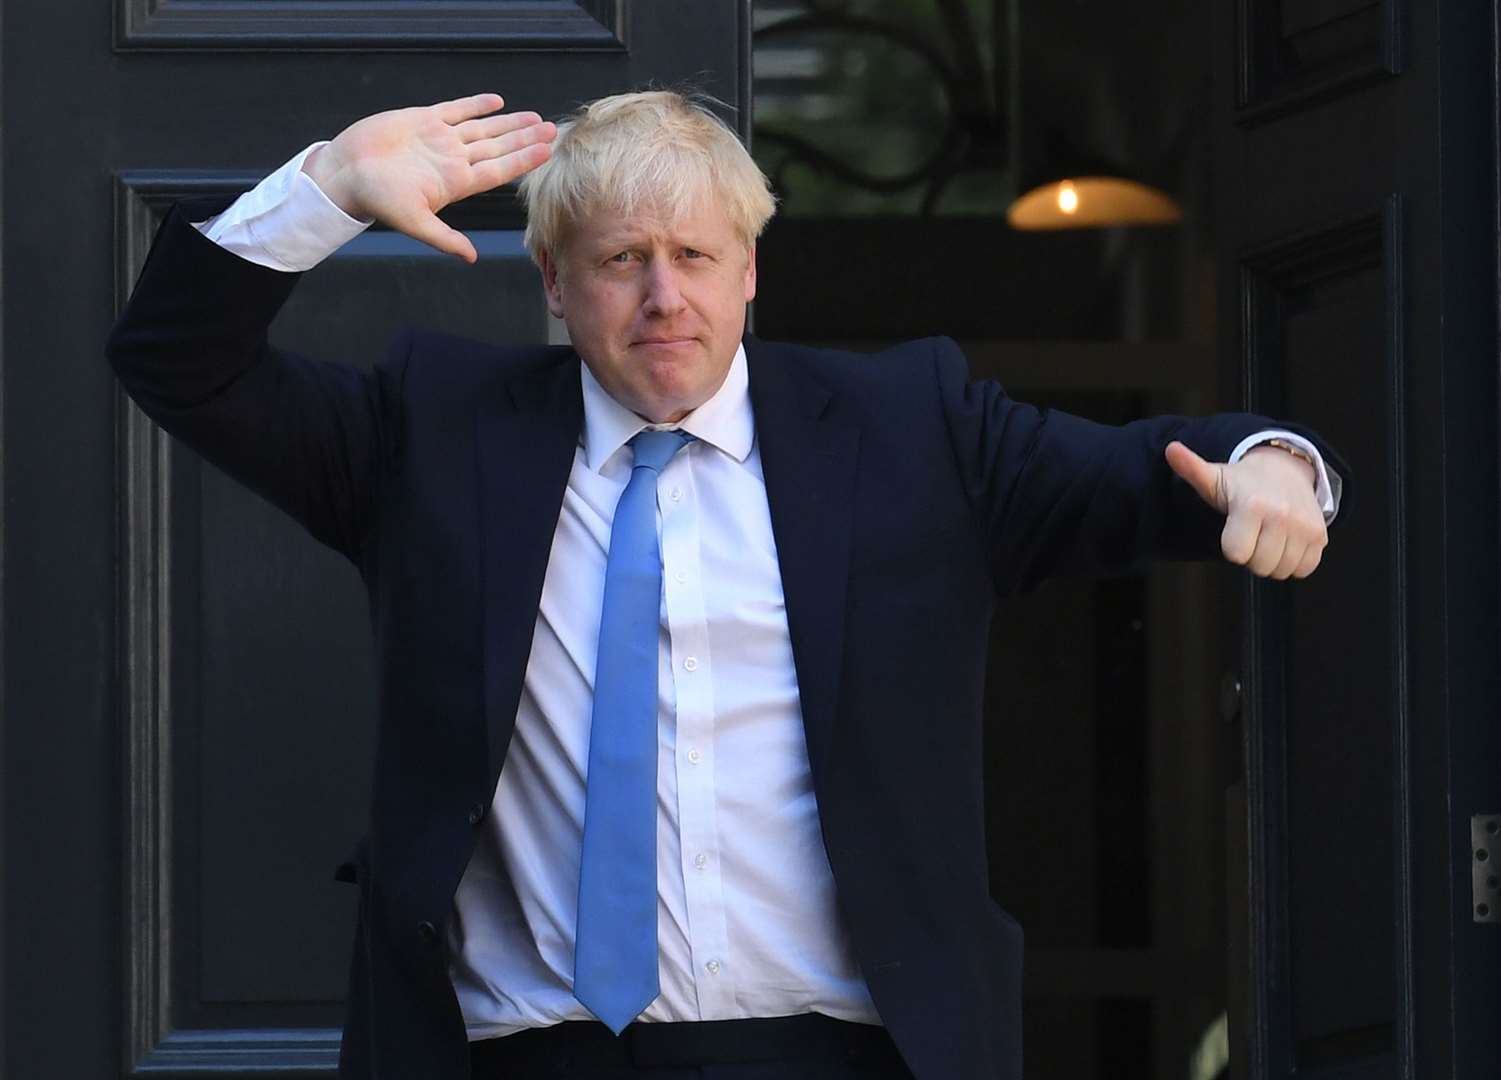 Prime Minister Boris Johnson pictured last year. Photo credit: Stefan Rousseau/PA Wire